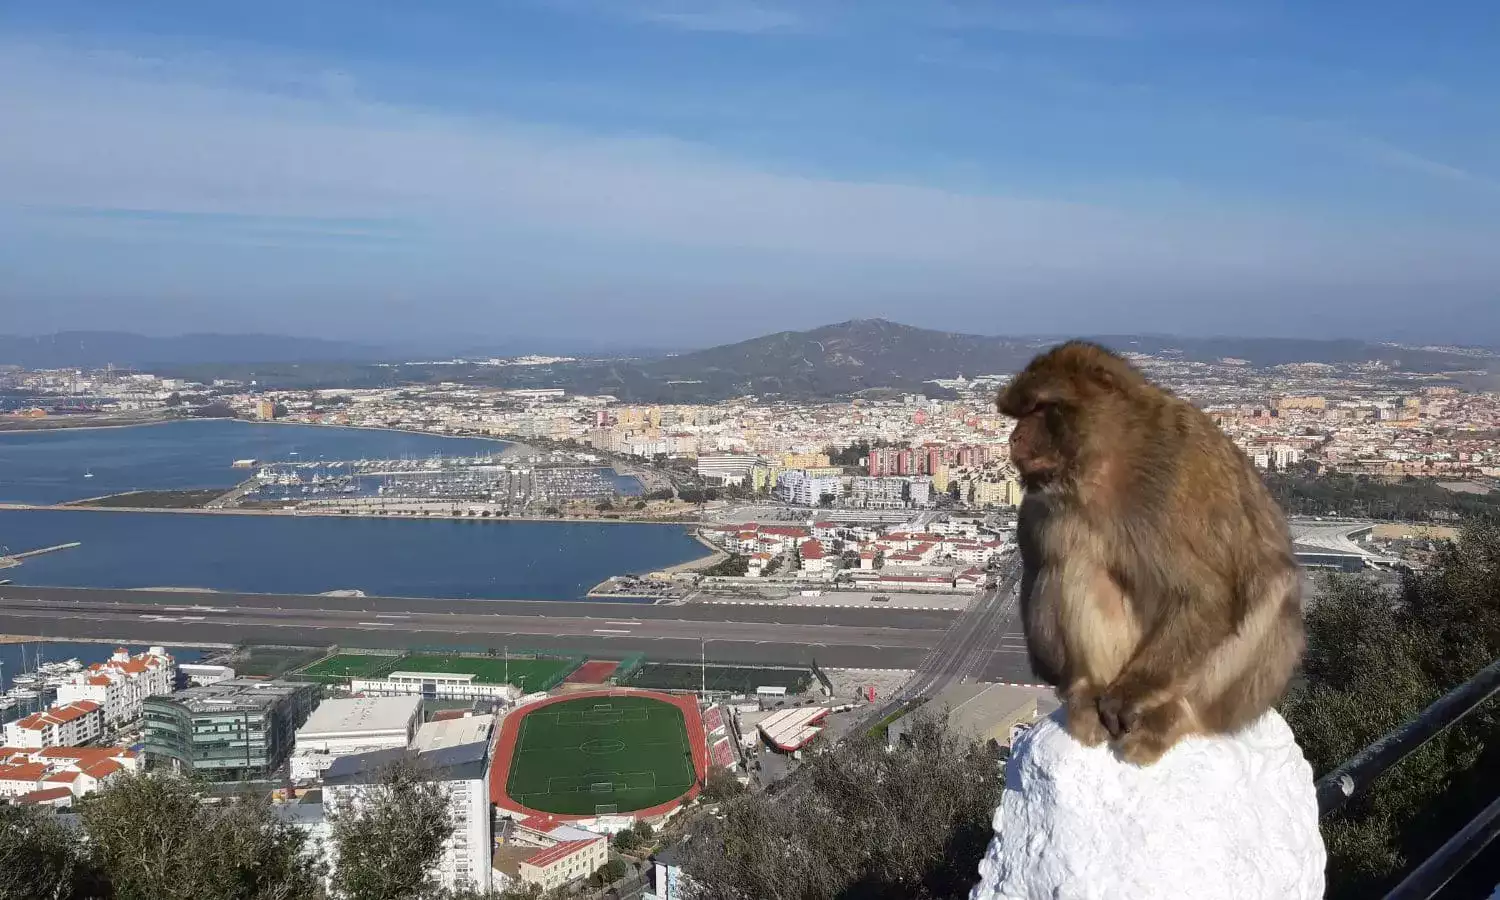 Barbary Macaque in Gibraltar, with a city in the background.